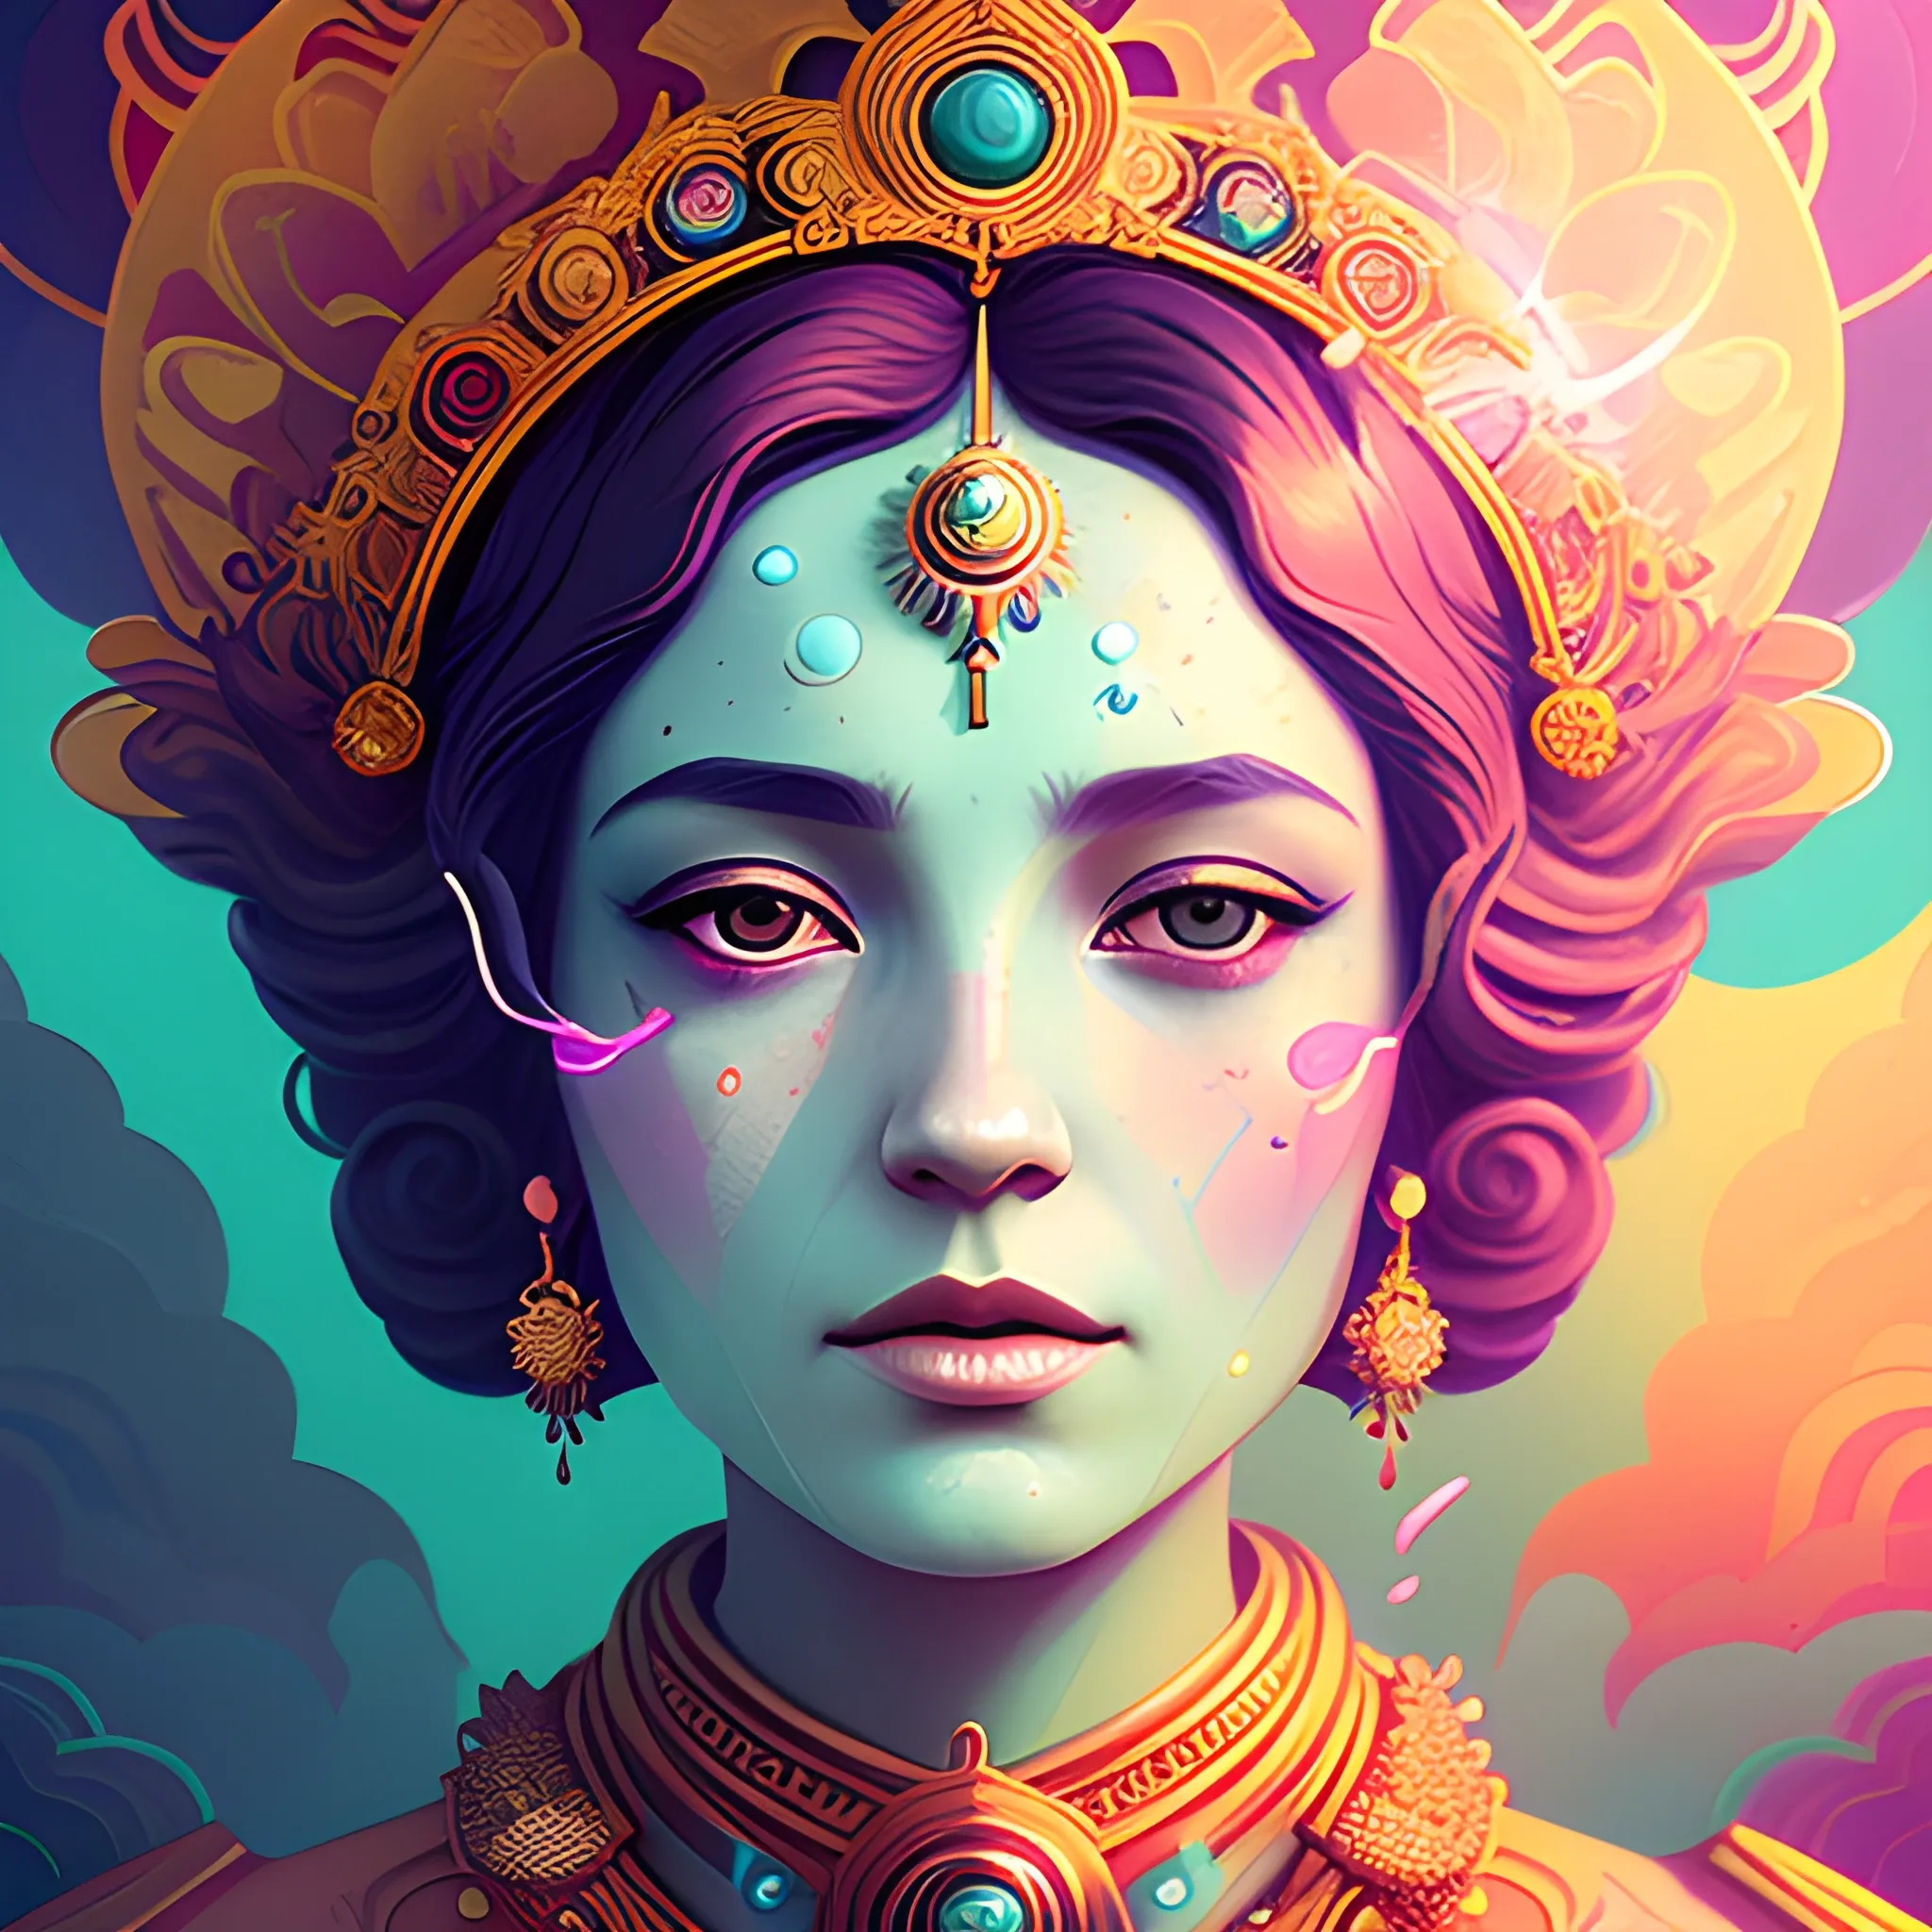 Flowery beautiful face of empress or priestess with gold jewellery, by petros afshar, ross tran, Tom Bagshaw, tom whalen, underwater bubbly psychedelic clouds, Anaglyph 3D lens blur effect